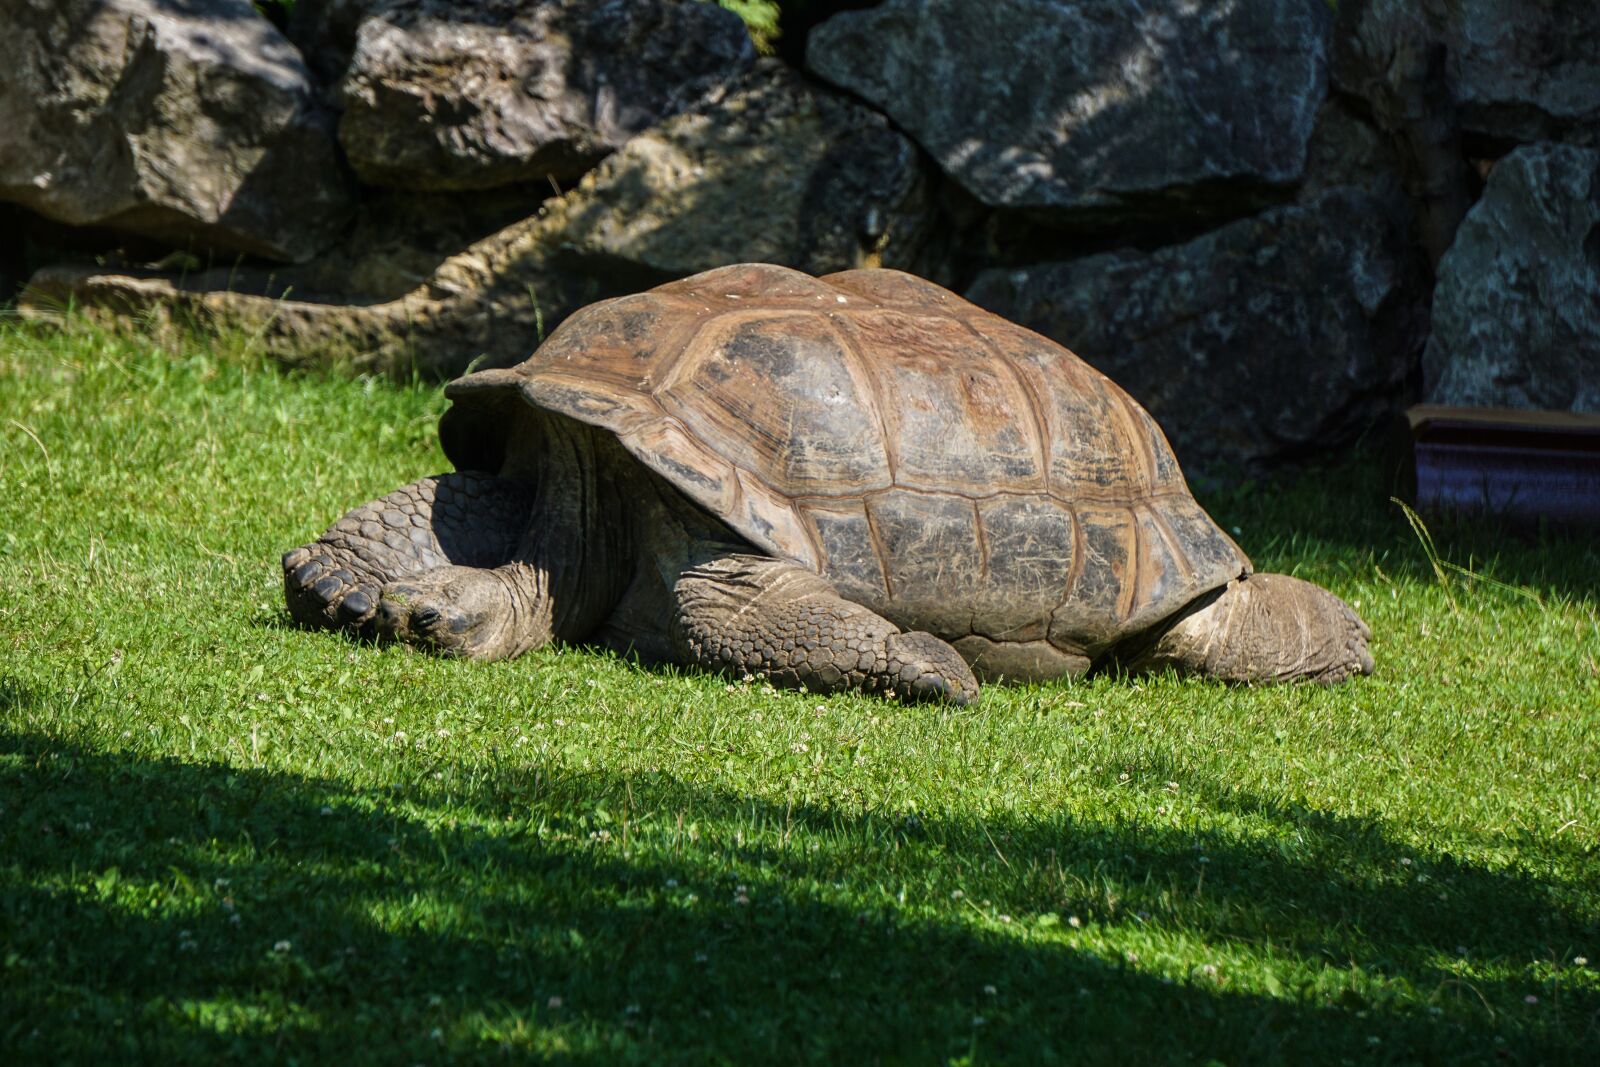 Sony a6000 sample photo. Giant tortoise, turtle, reptile photography